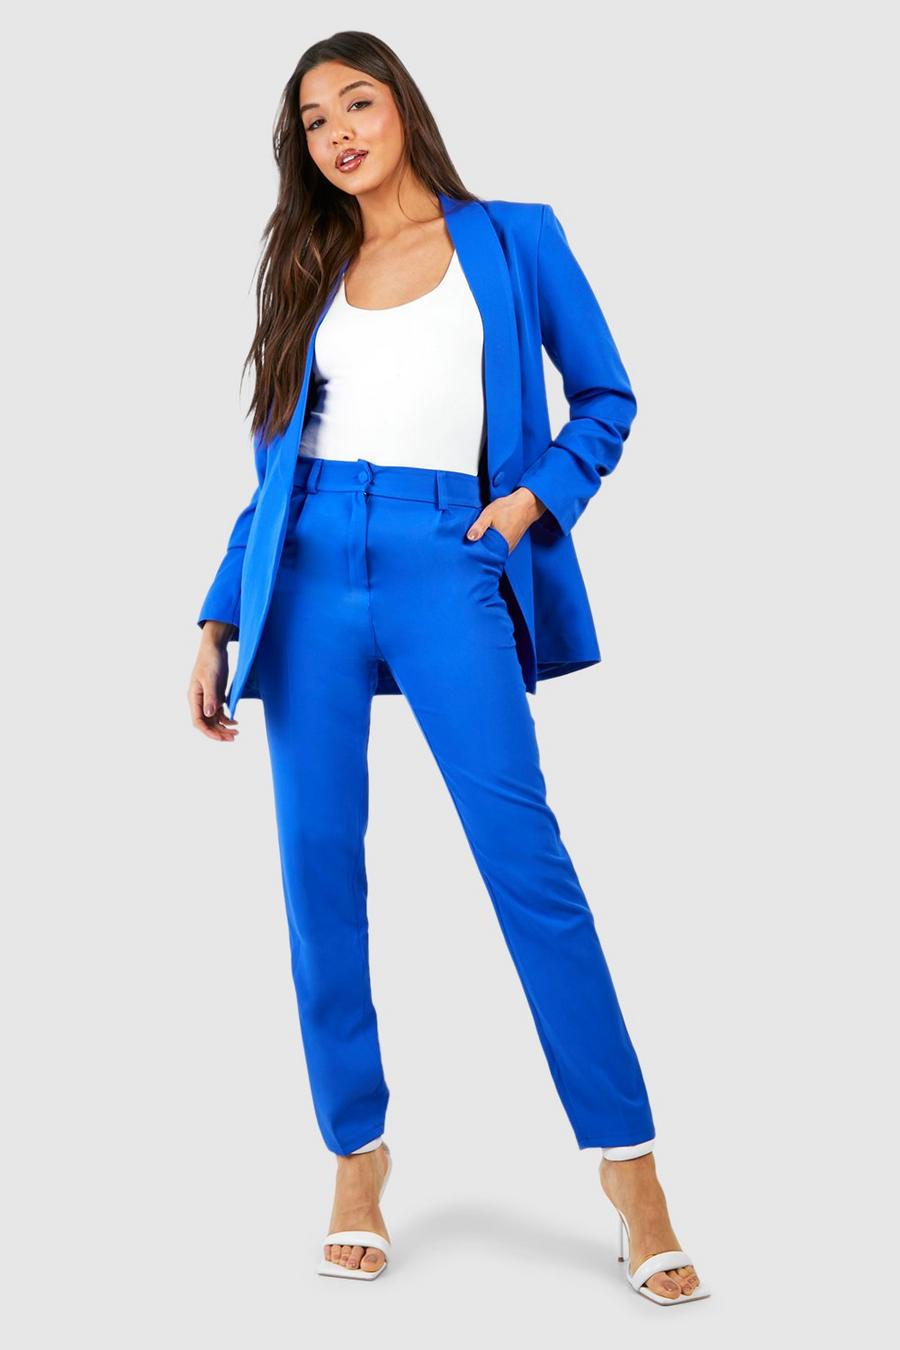 Image result for blue pant outfit  Blue pants outfit, Royal blue pants  outfit, Royal blue pants